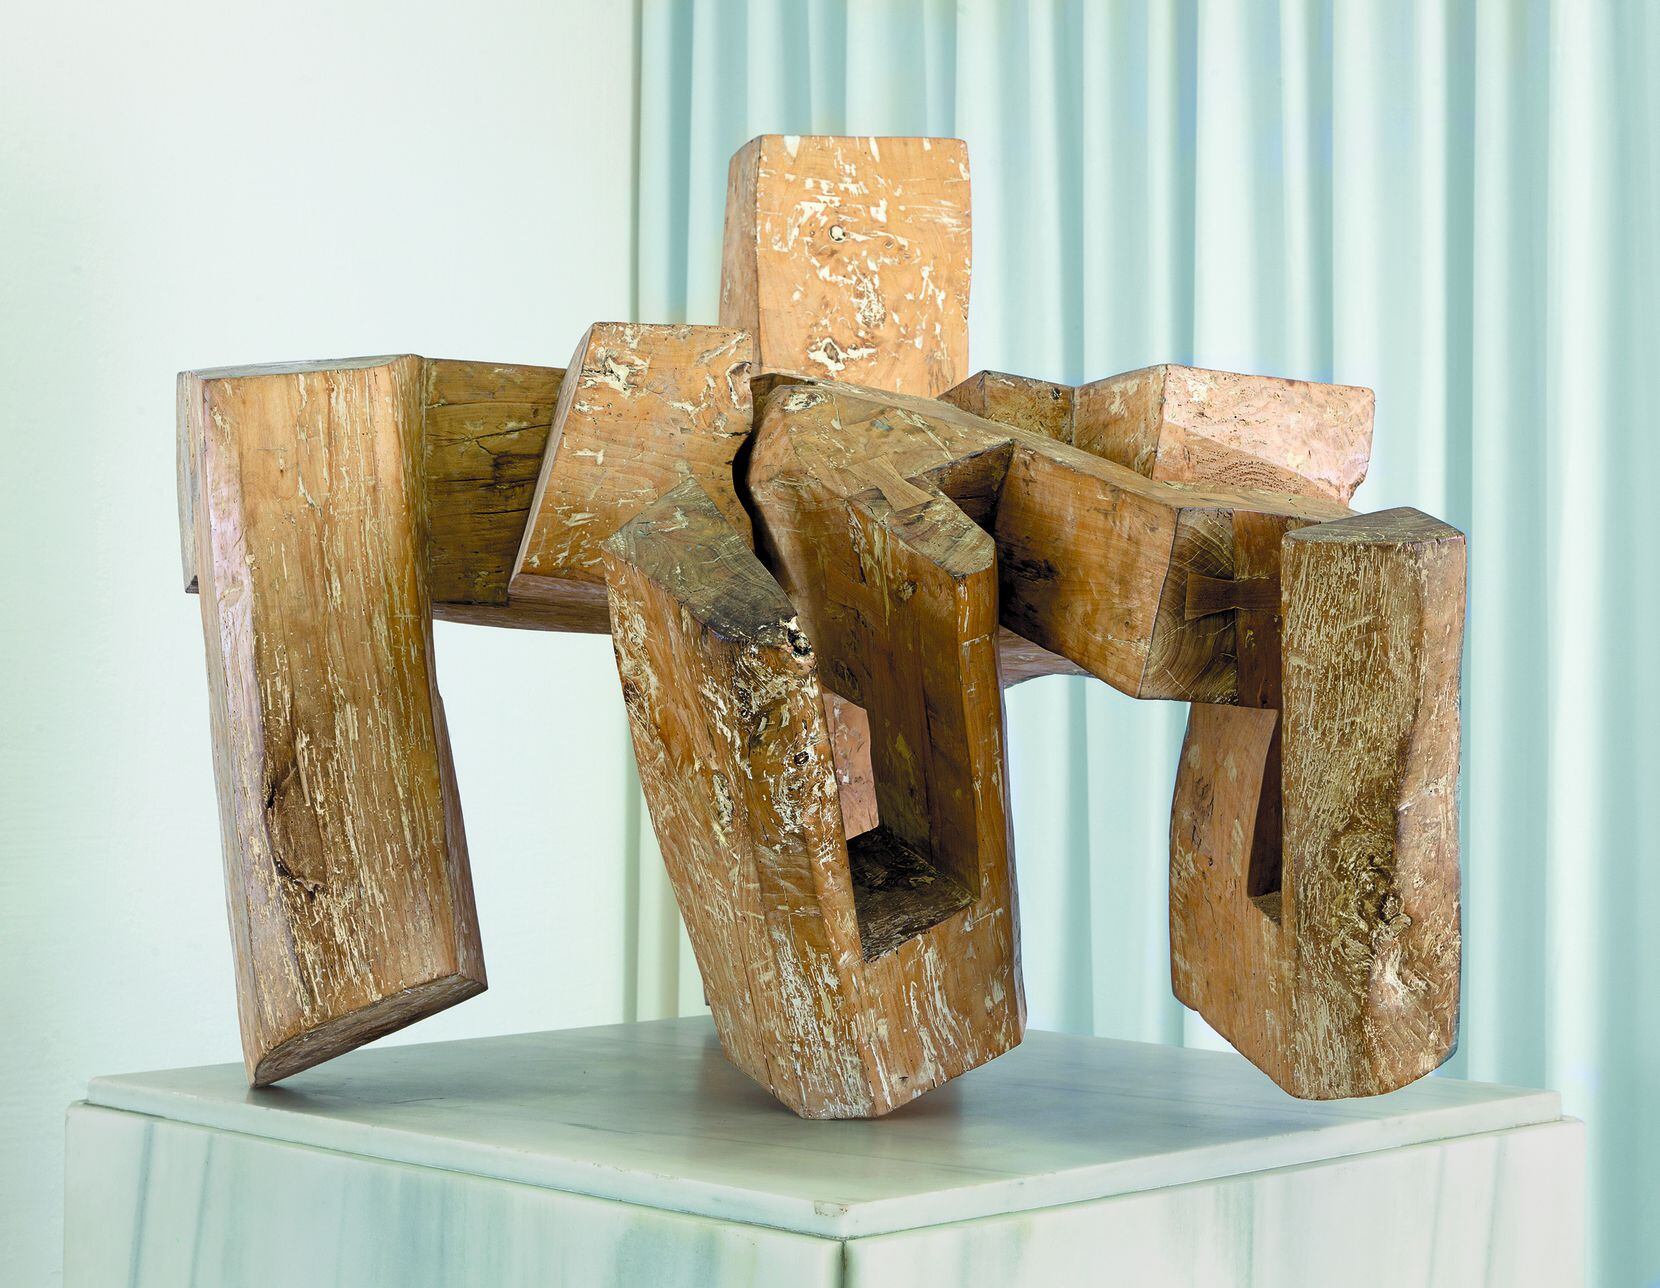 Sculptor Eduardo Chillida was commissioned to create the first work seen by visitors at the...